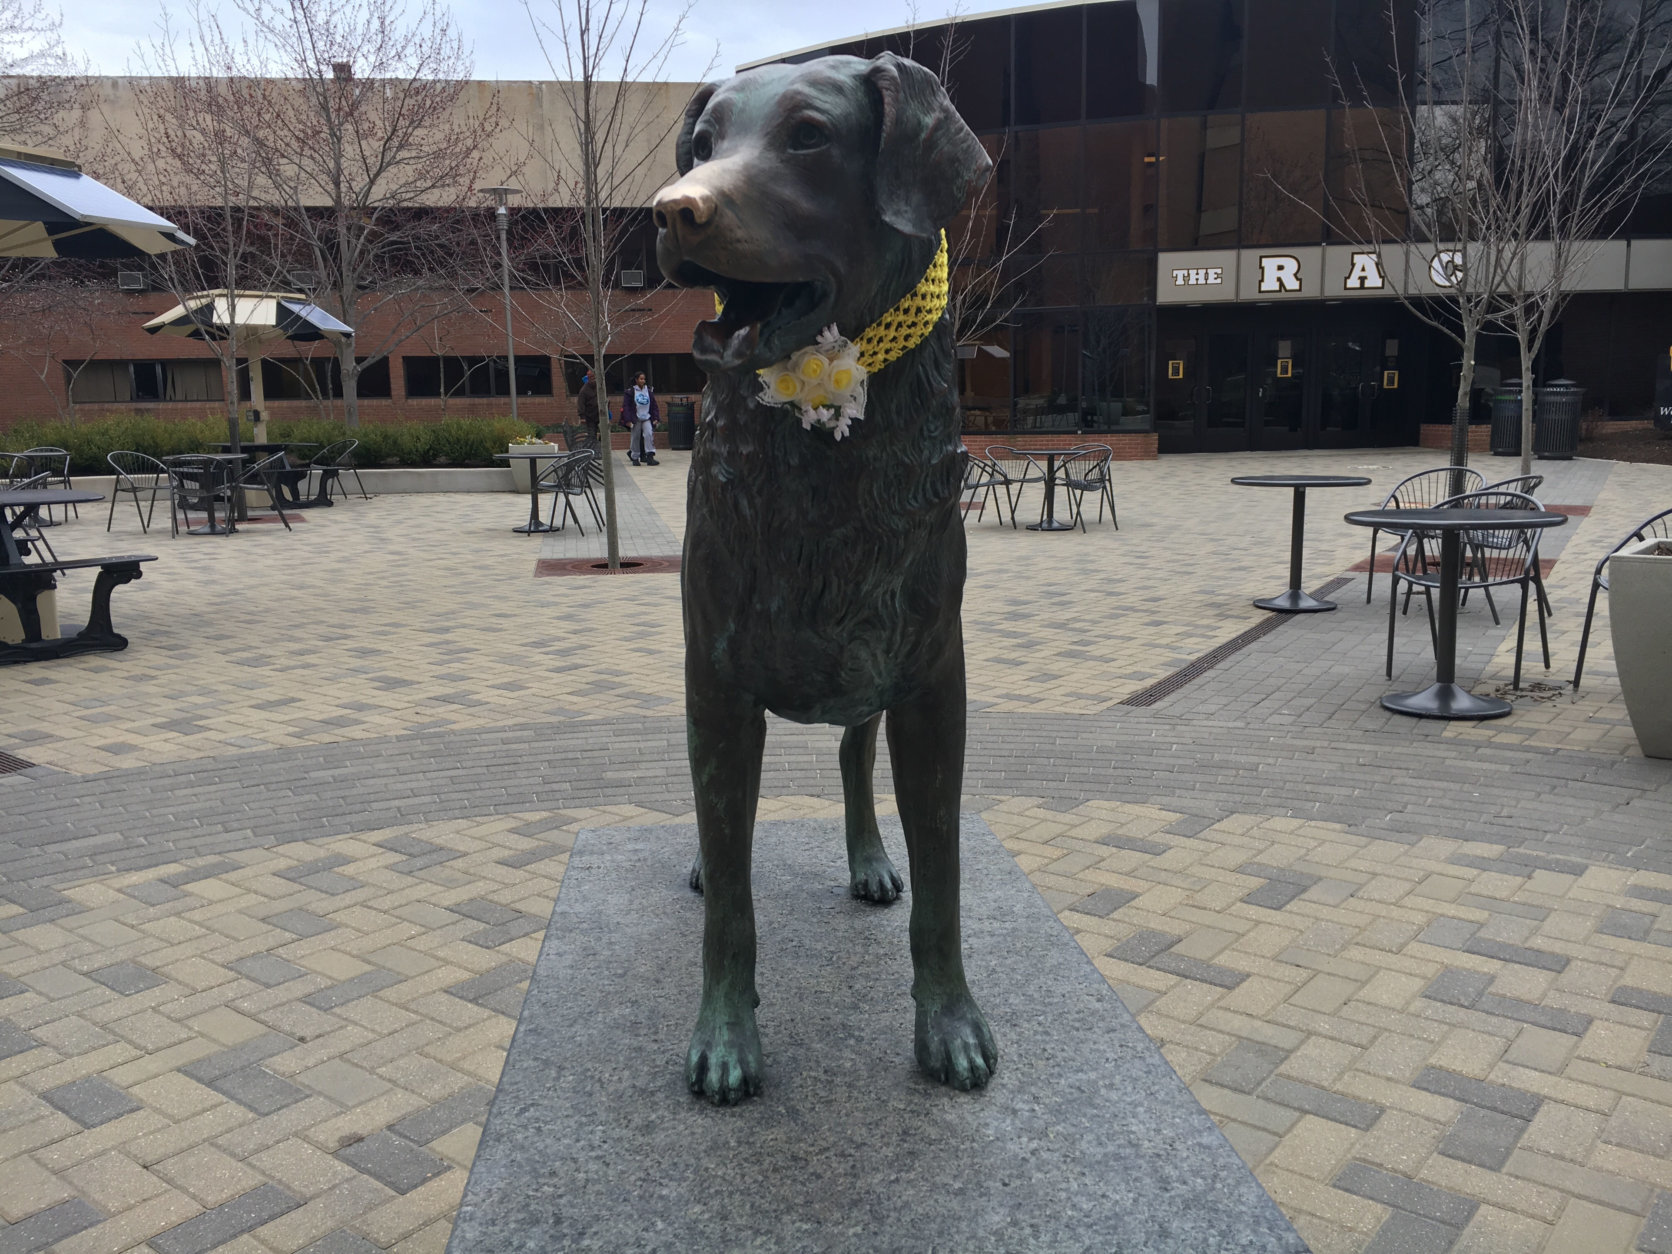 The UMBC mascot, fittingly named “True Grit,” dressed up for the occasion. (WTOP/Keara Dowd)